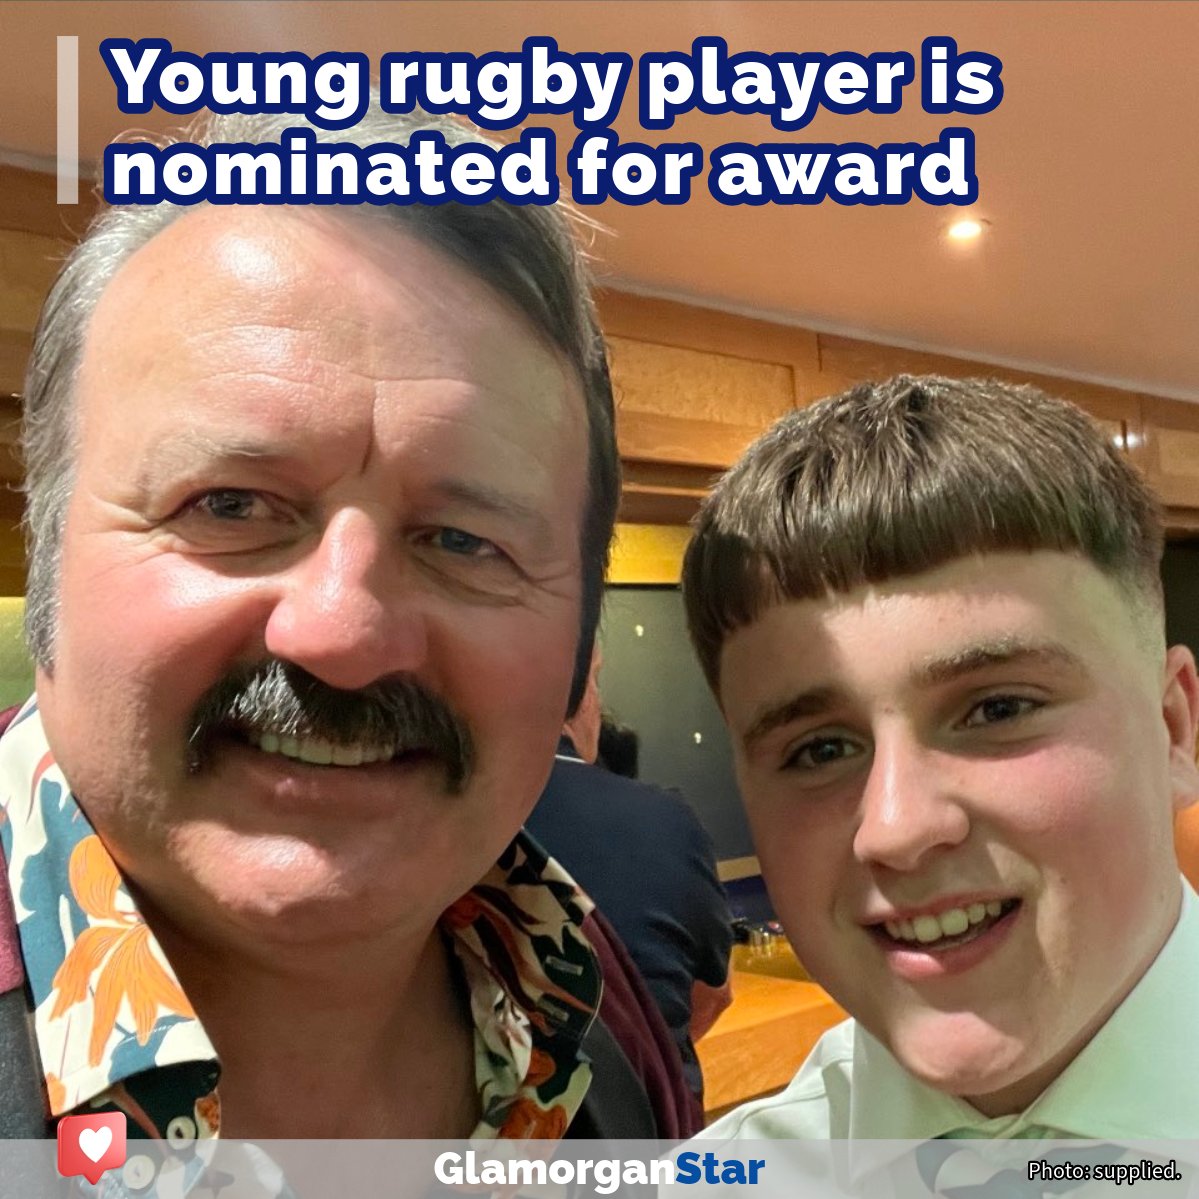 Sport – A YOUNG rugby player who started at Barry RFC has been nominated for a community award. LINK glamorganstar.co.uk/young-player-n…